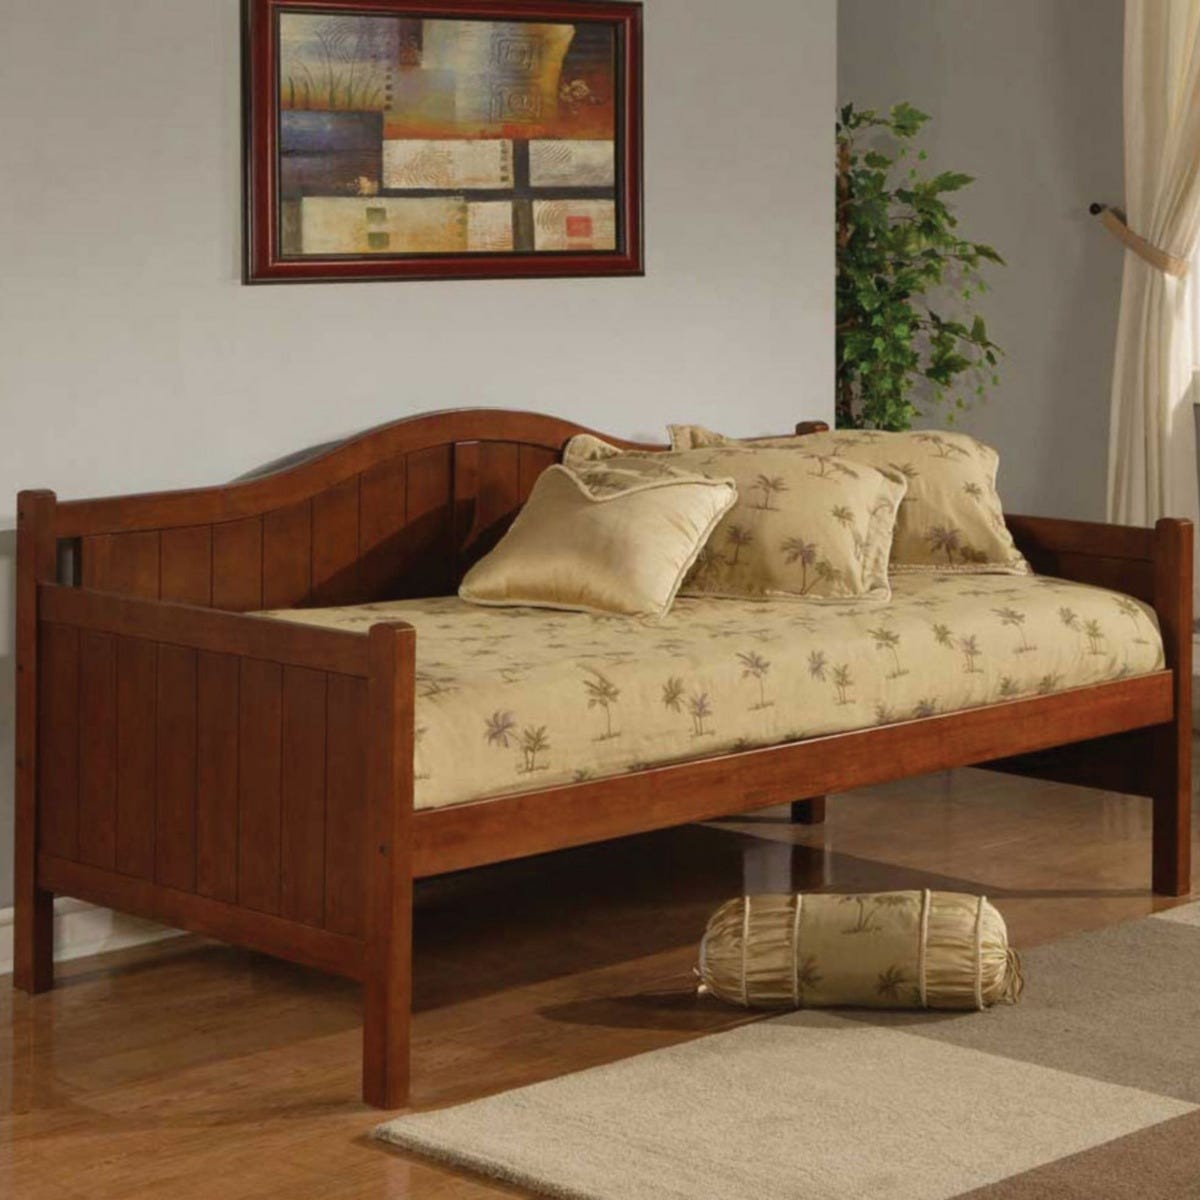 Wooden daybed frame daybed is constructed of solid wood and